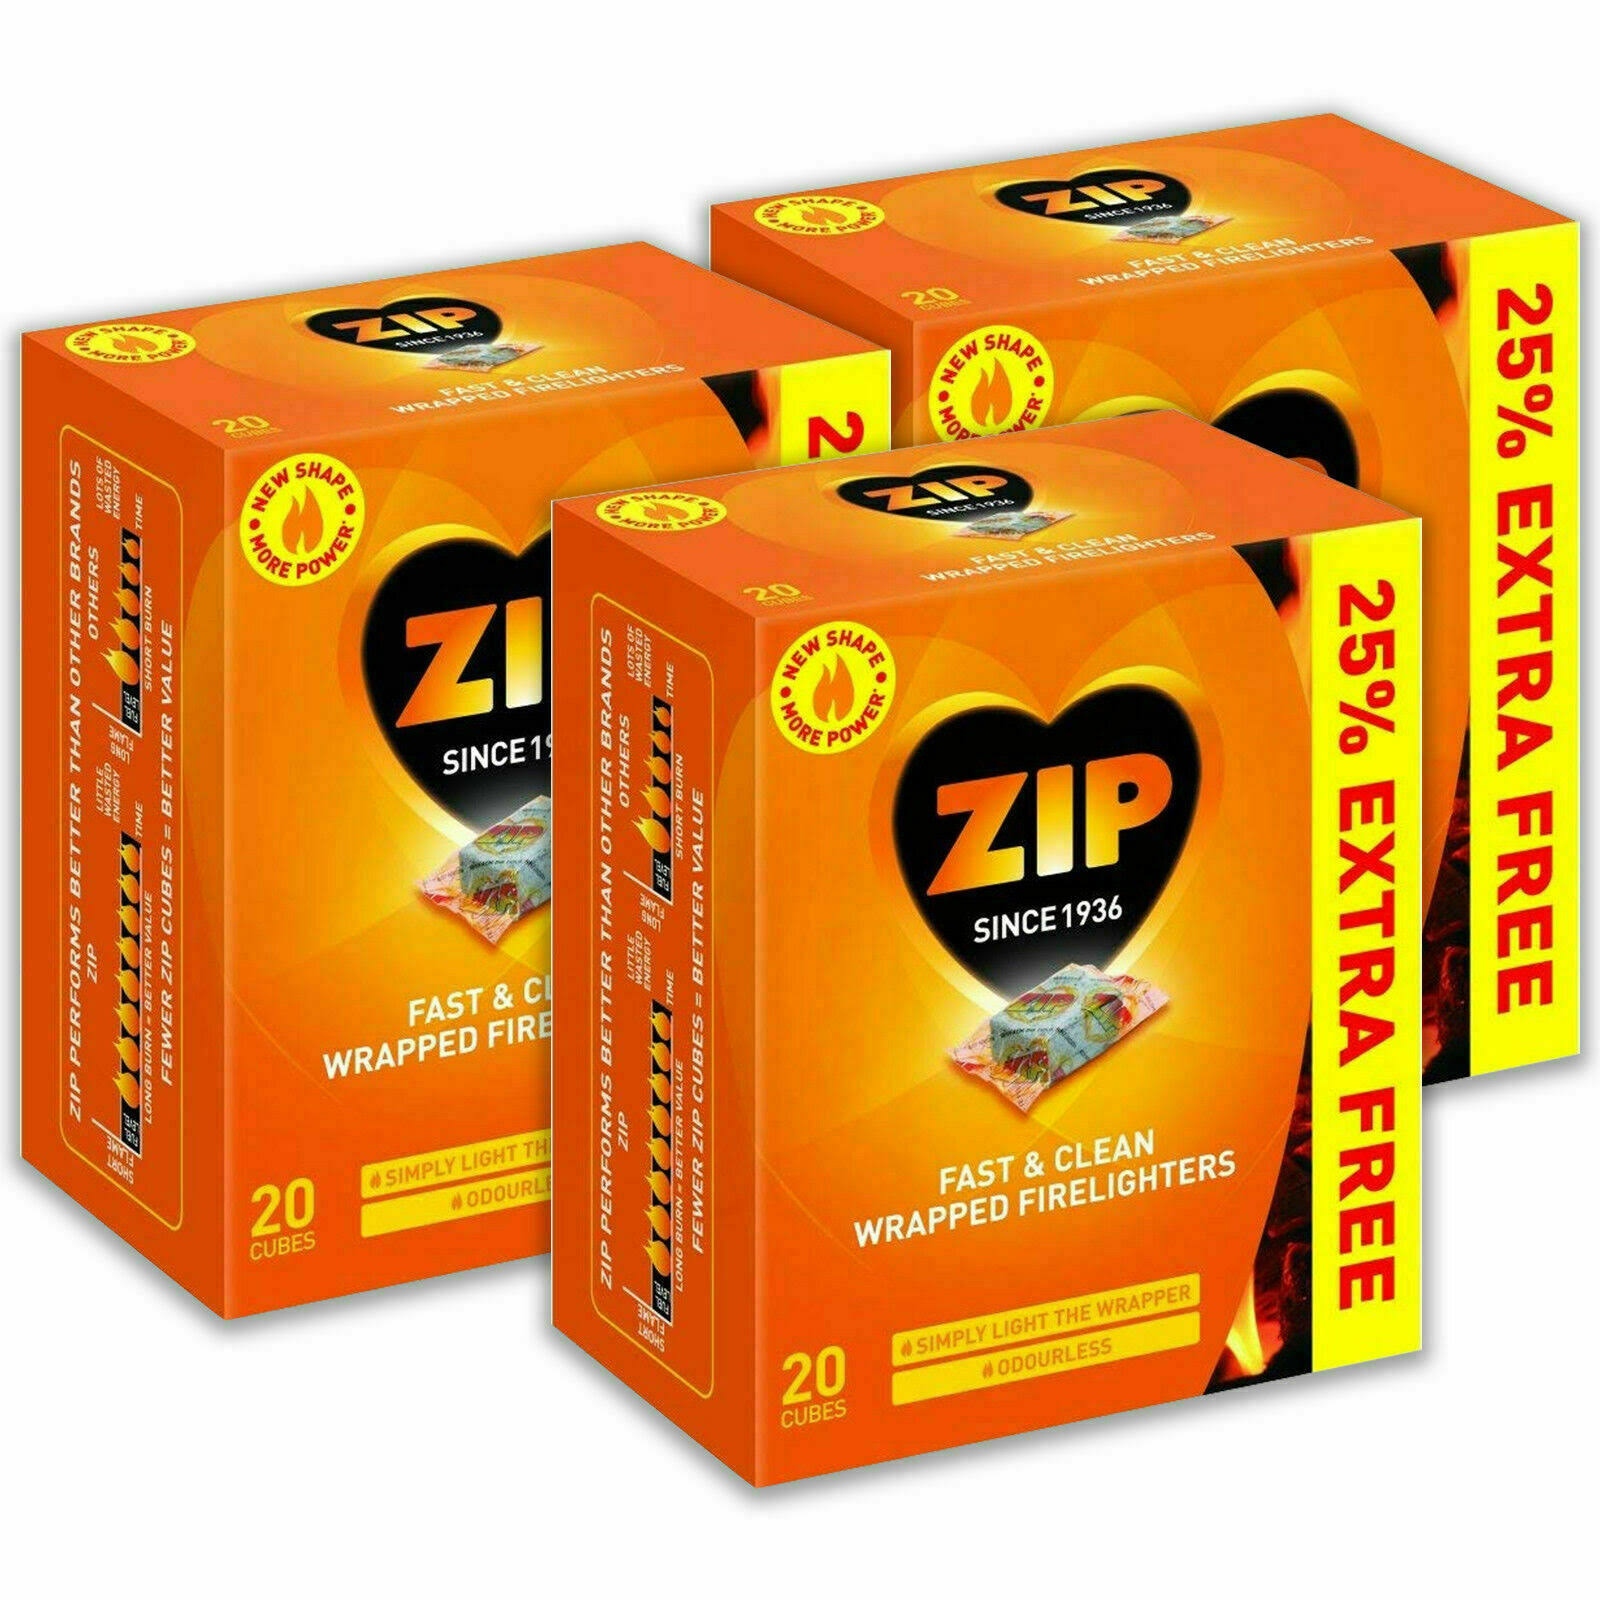 Zip Fast and Clean Wrapped Firelighters - 20 Cubes